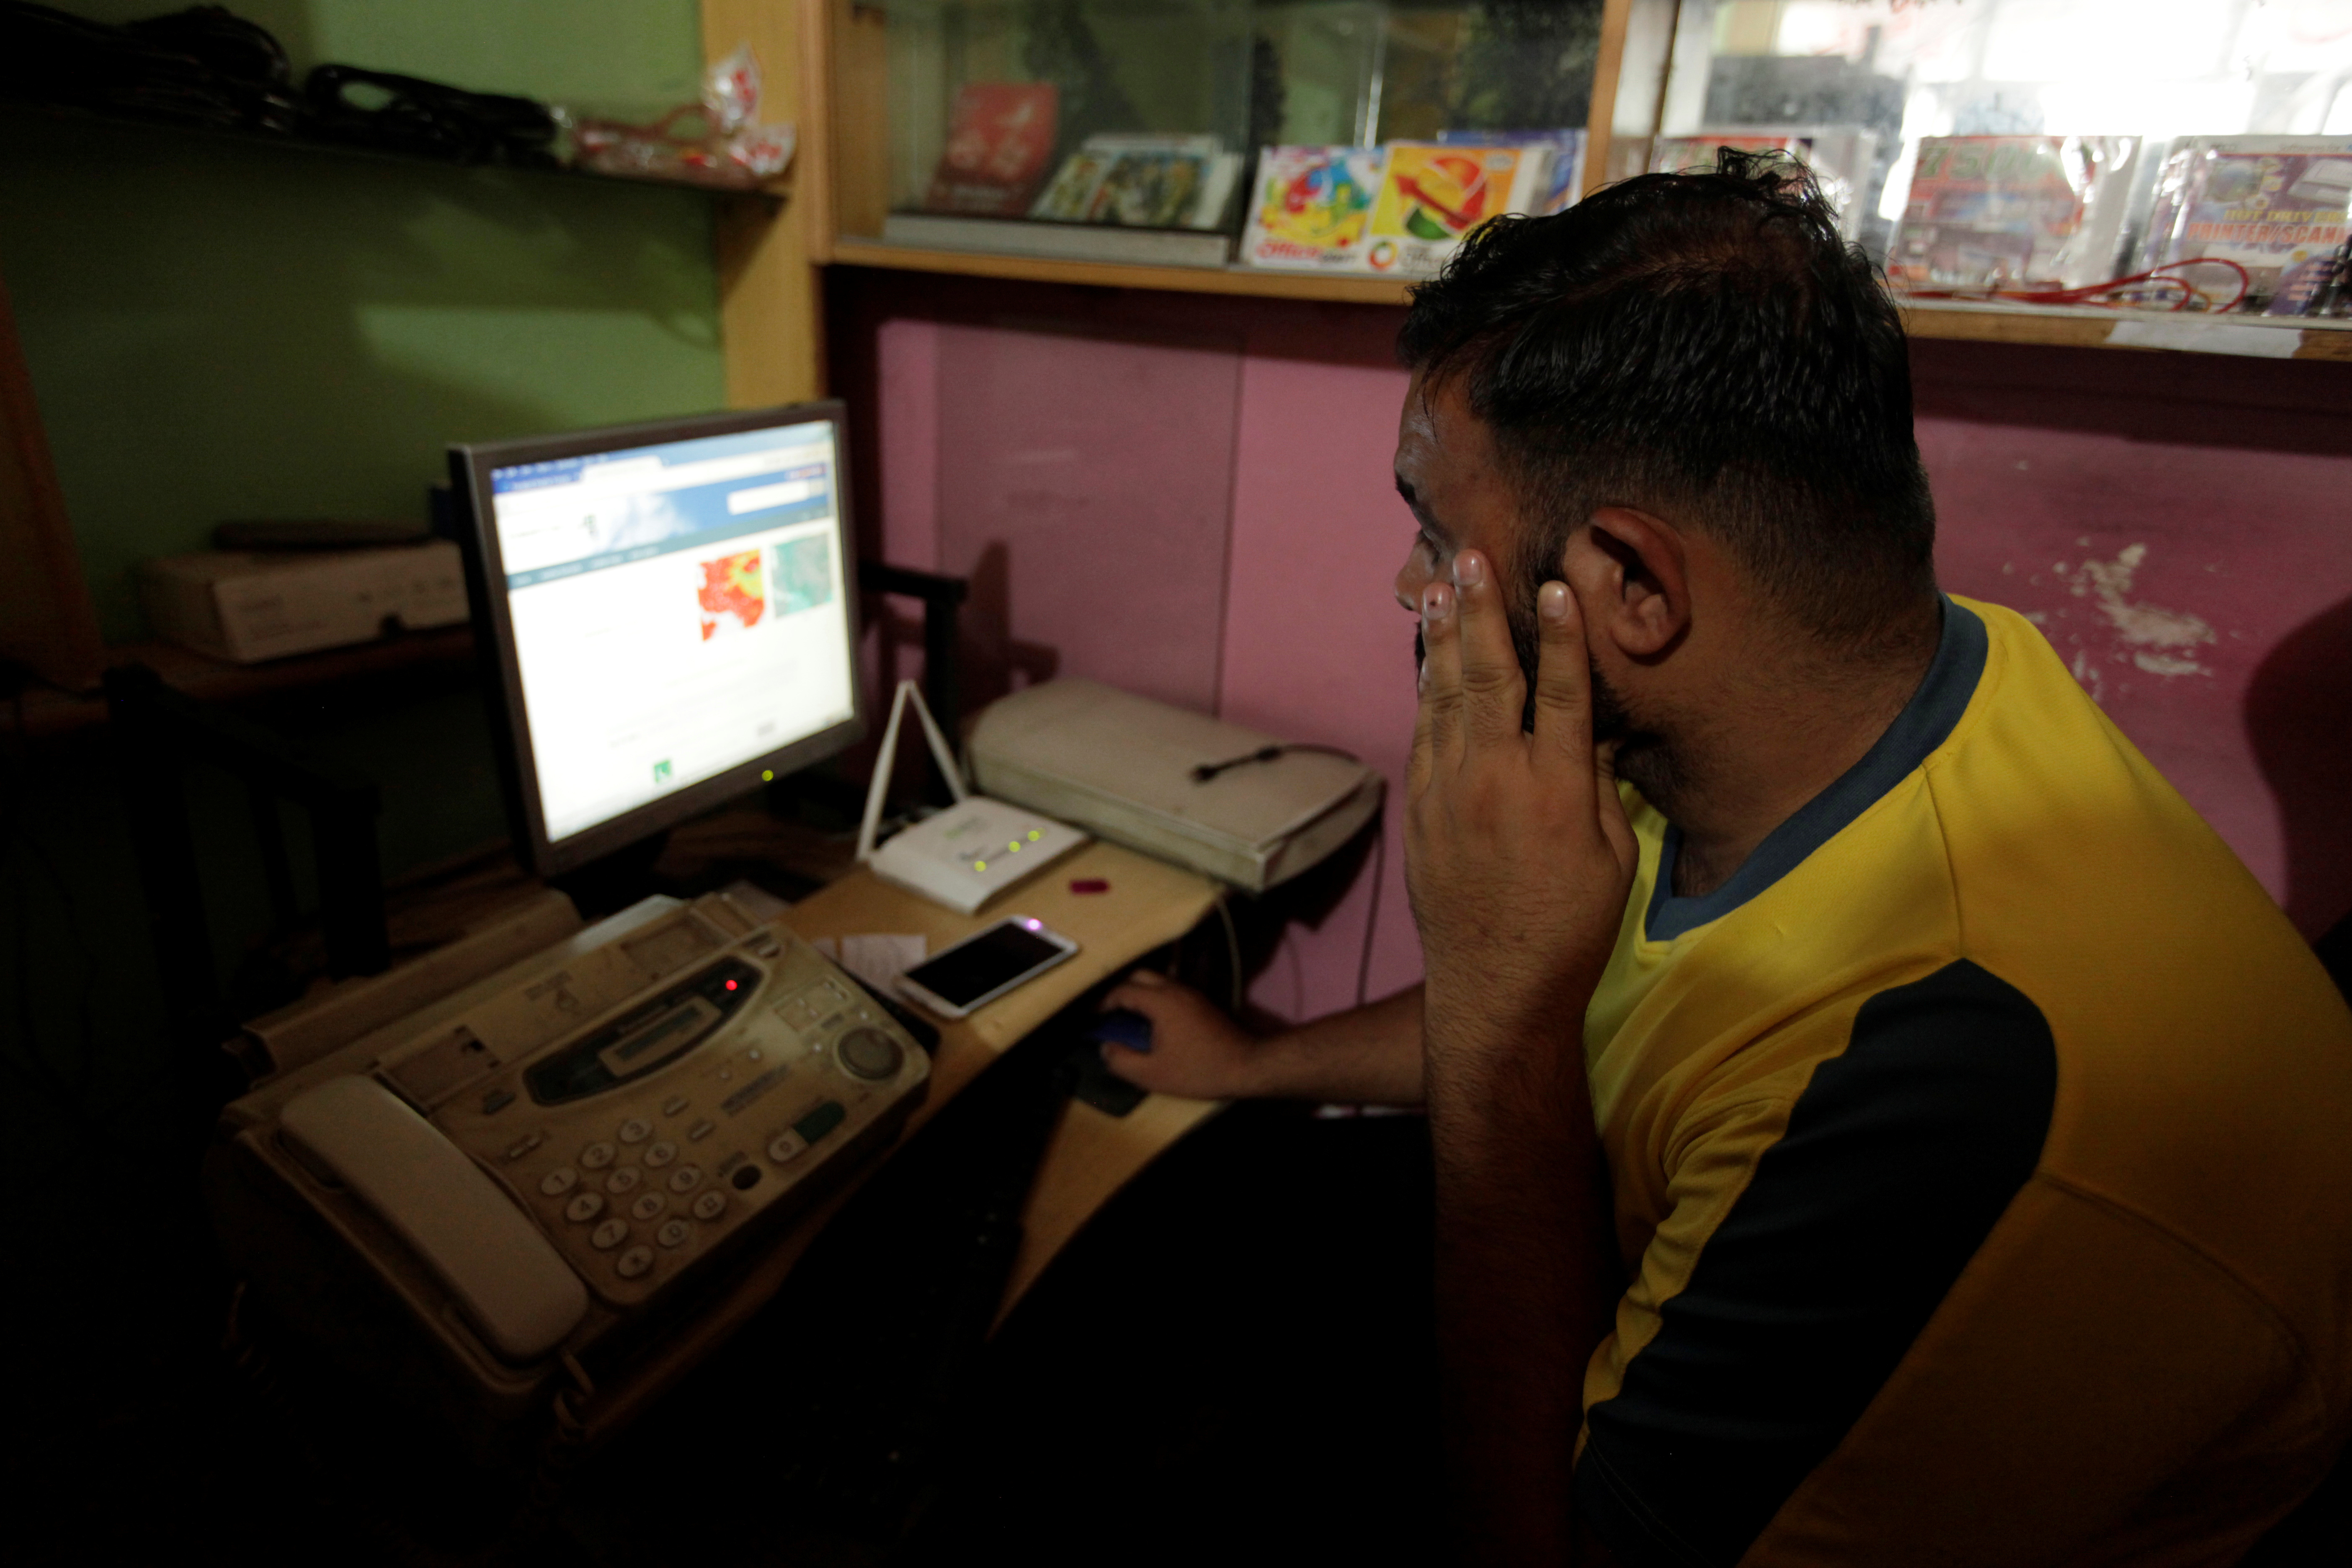 A man explores social media on a computer at an internet club in Islamabad